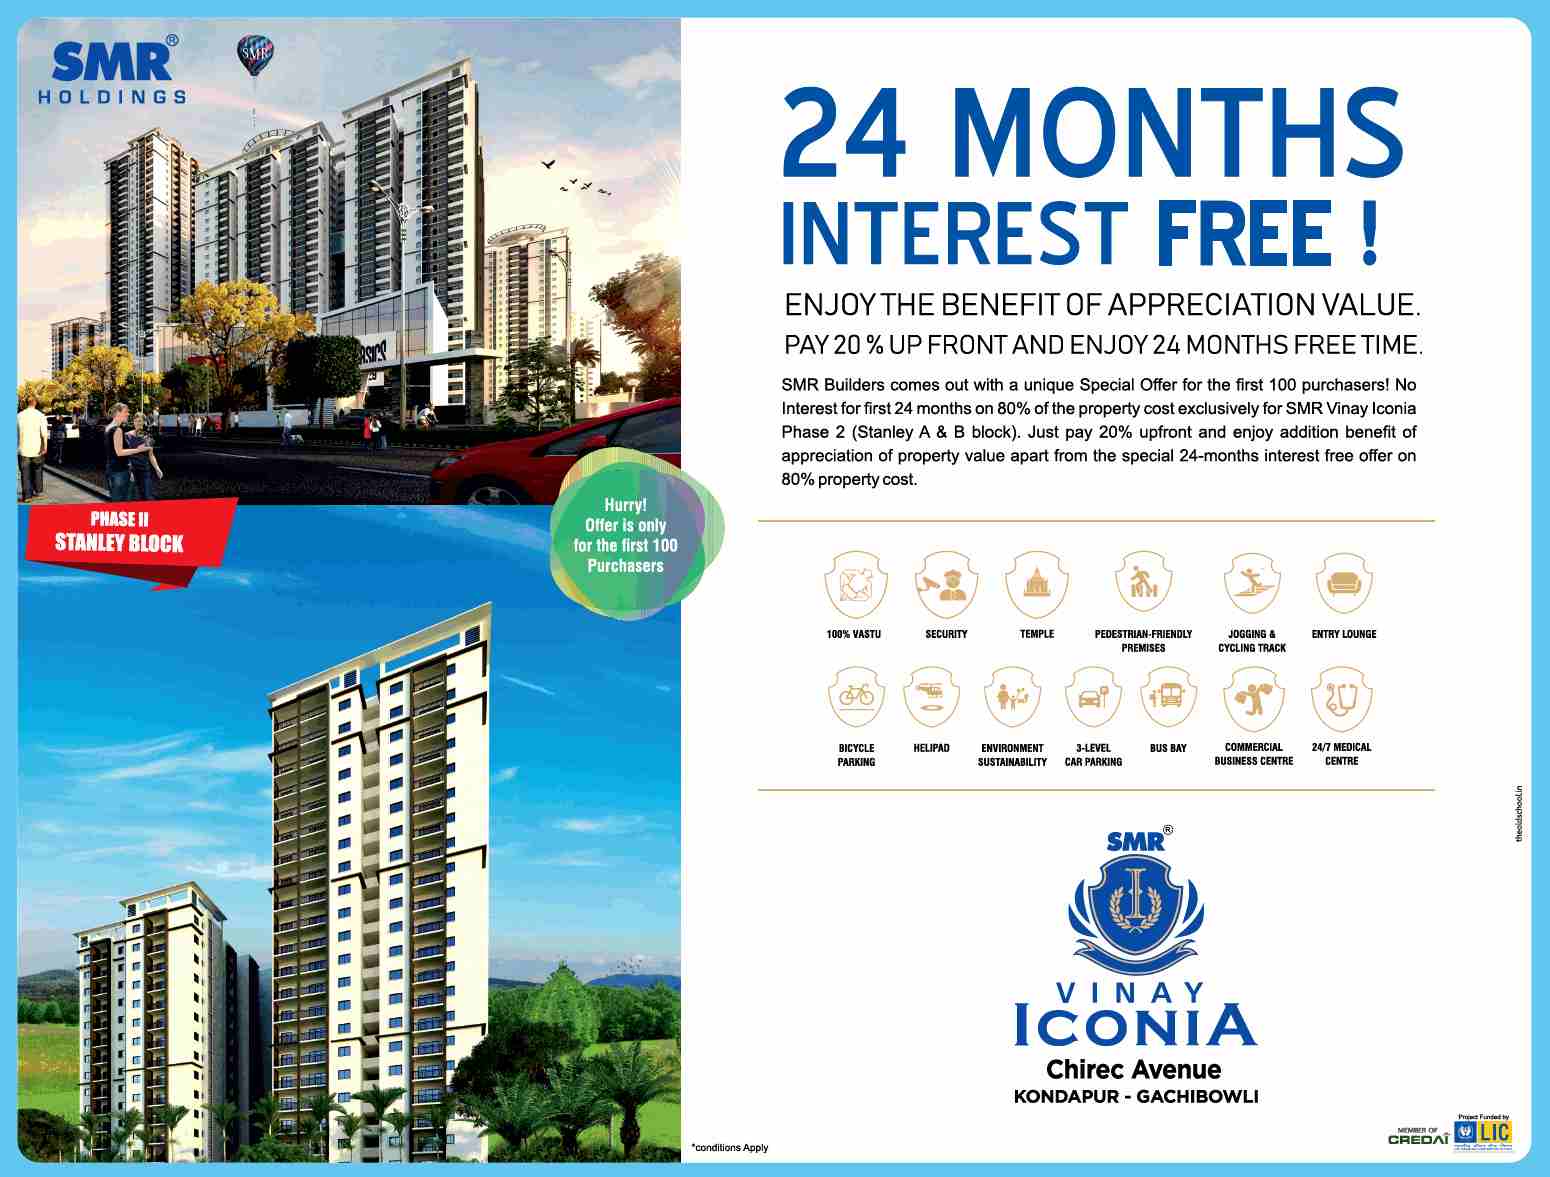 Get 24 months interest free at SMR Vinay Iconia in Hyderabad Update